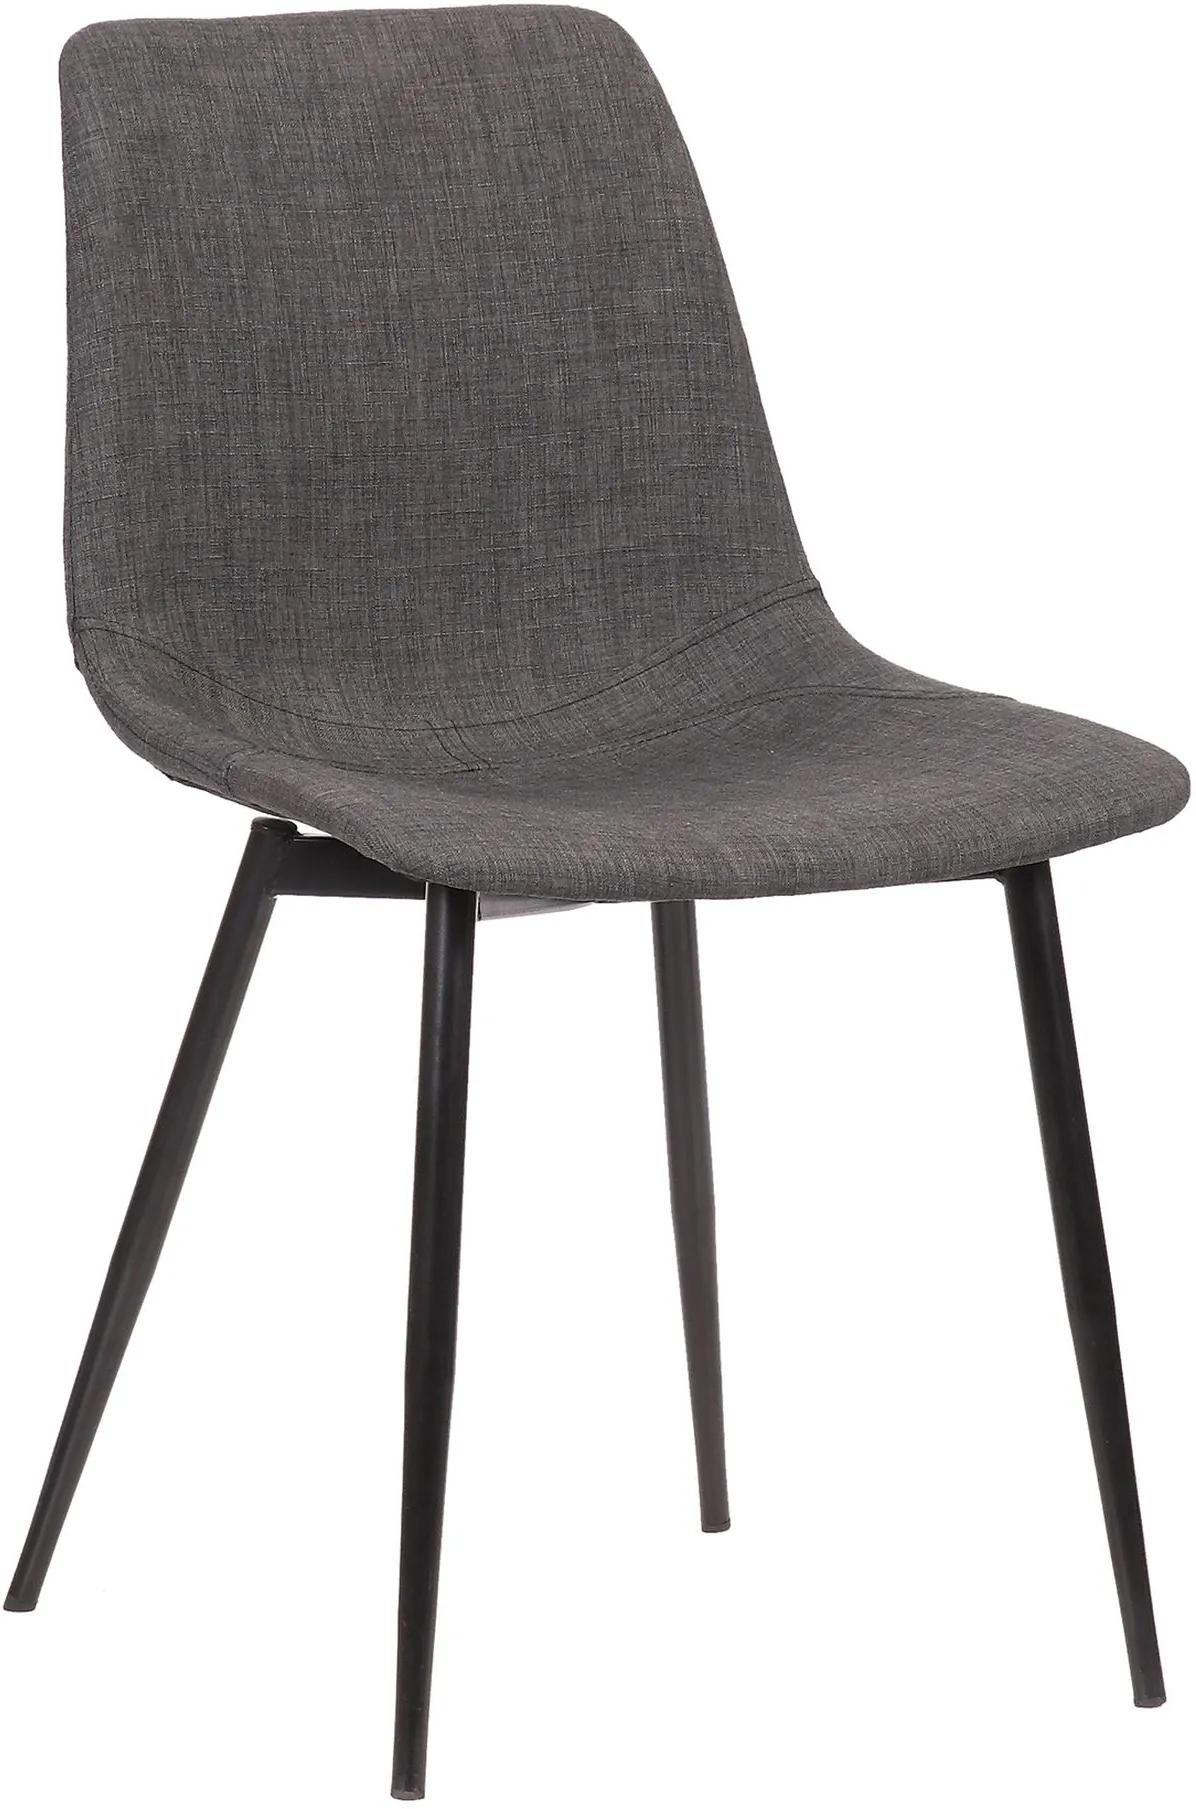 Armen Living Monte Charcoal Dining Chair